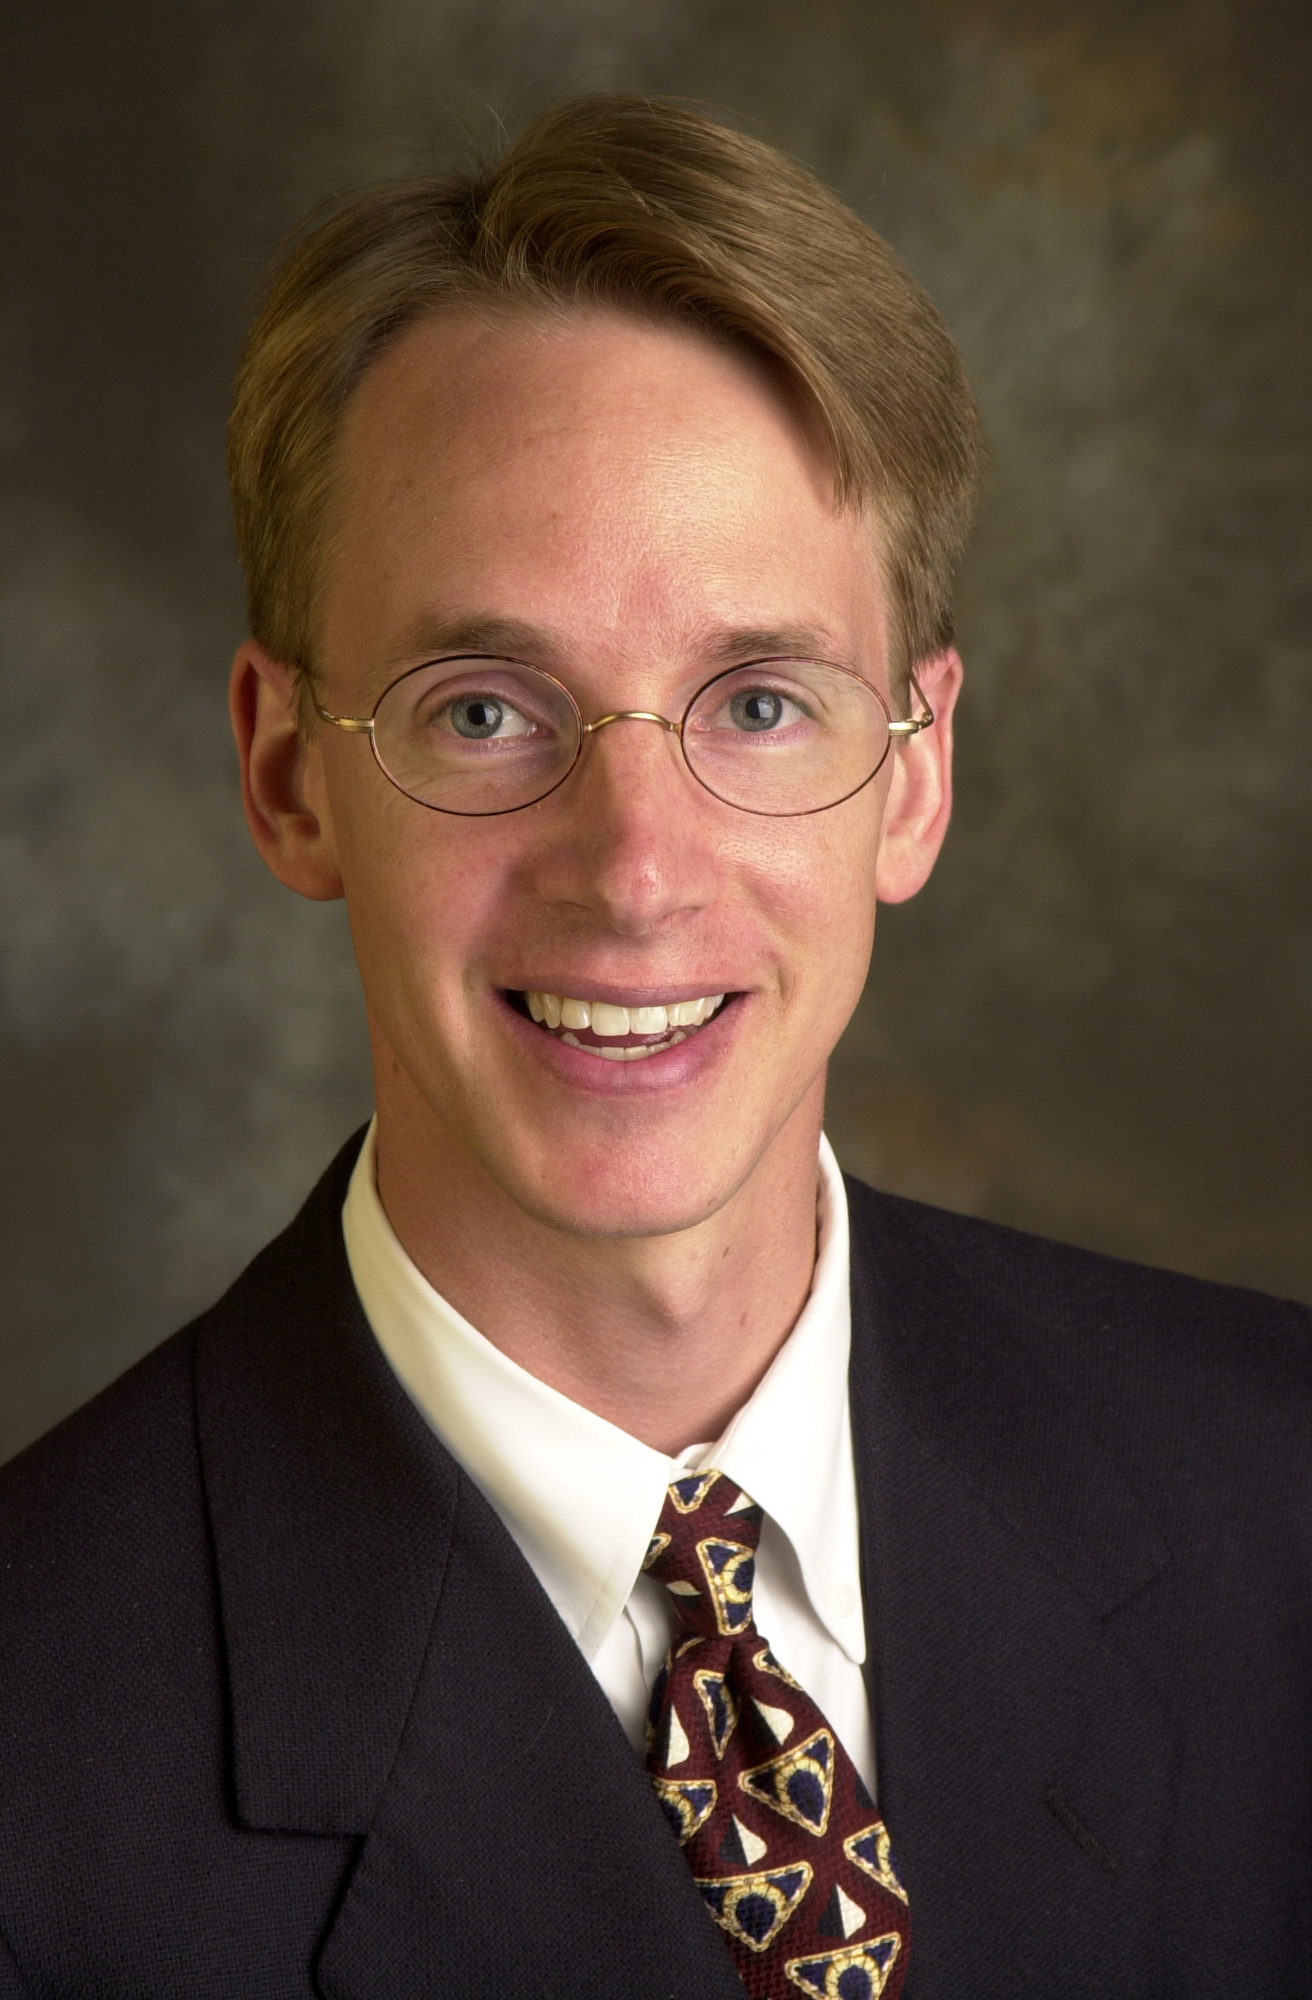 Dr. Greg Martin is co-principal investigator for the ACME POCT and a professor in the Emory University School of Medicine.